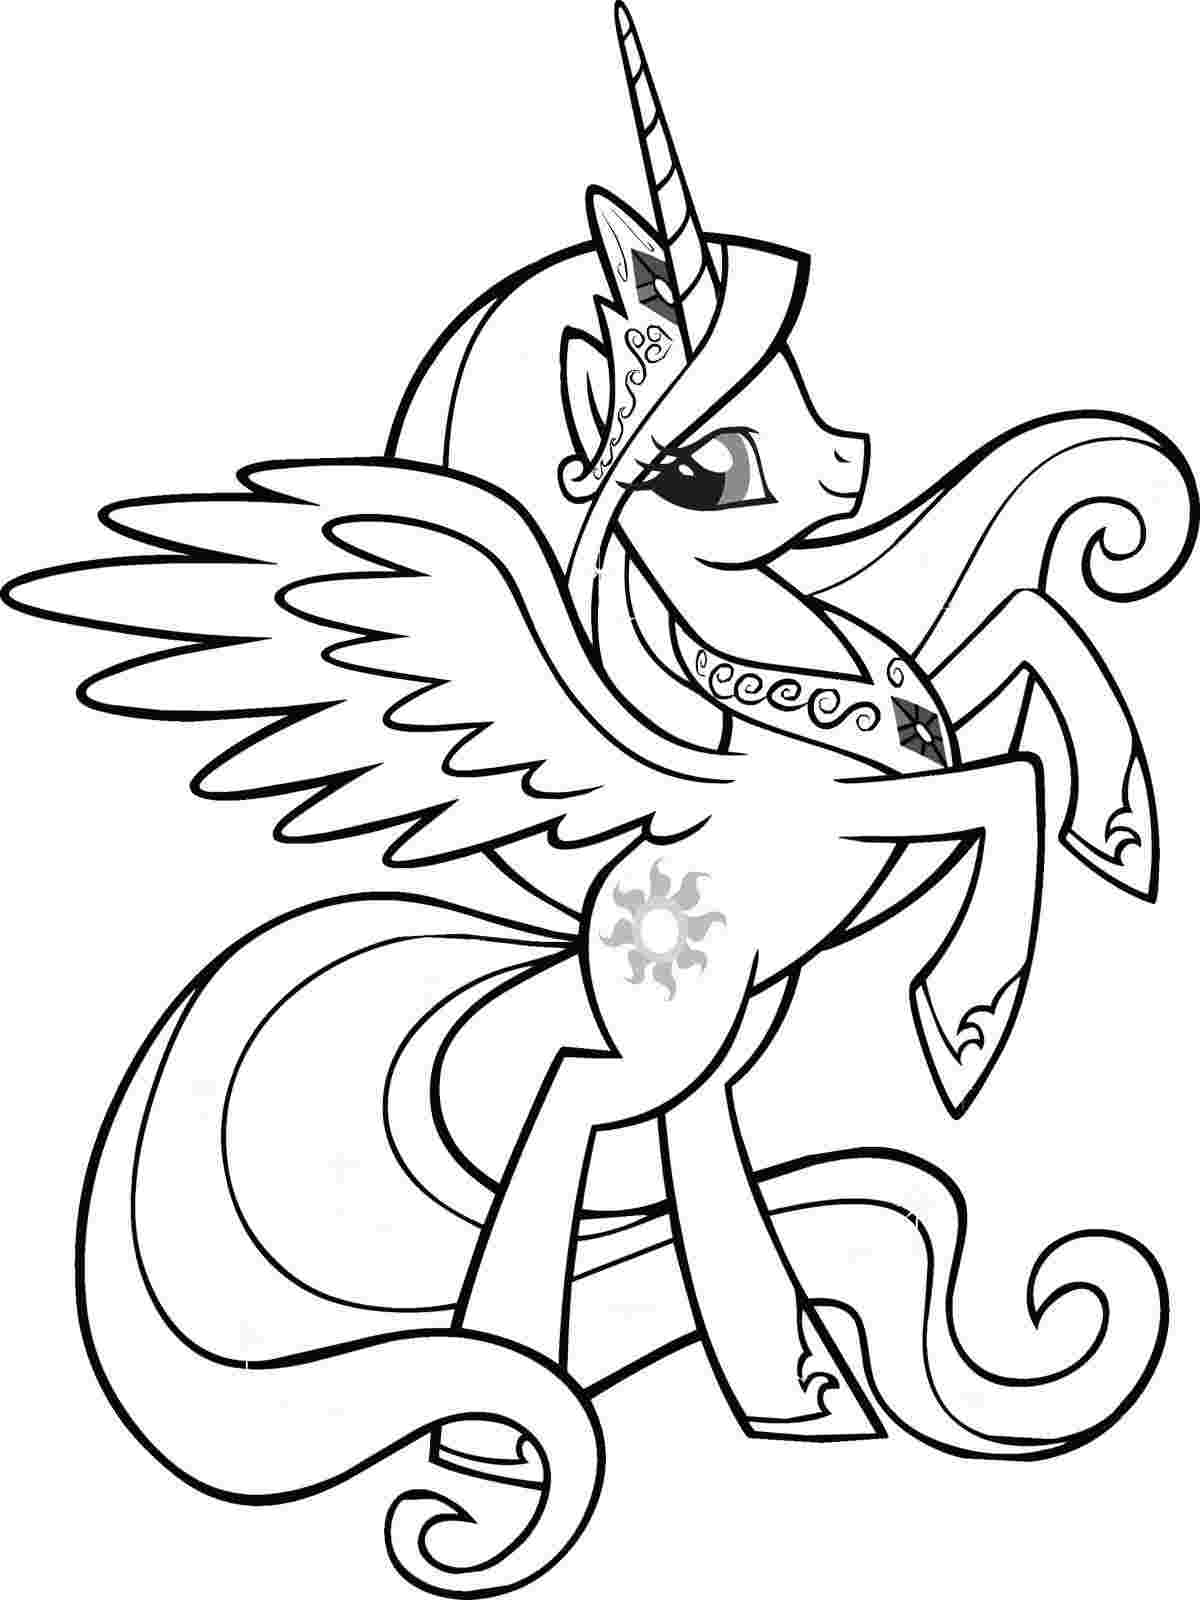 Coloring Pages : Colouring Unicorn Princess Coloring With My ...